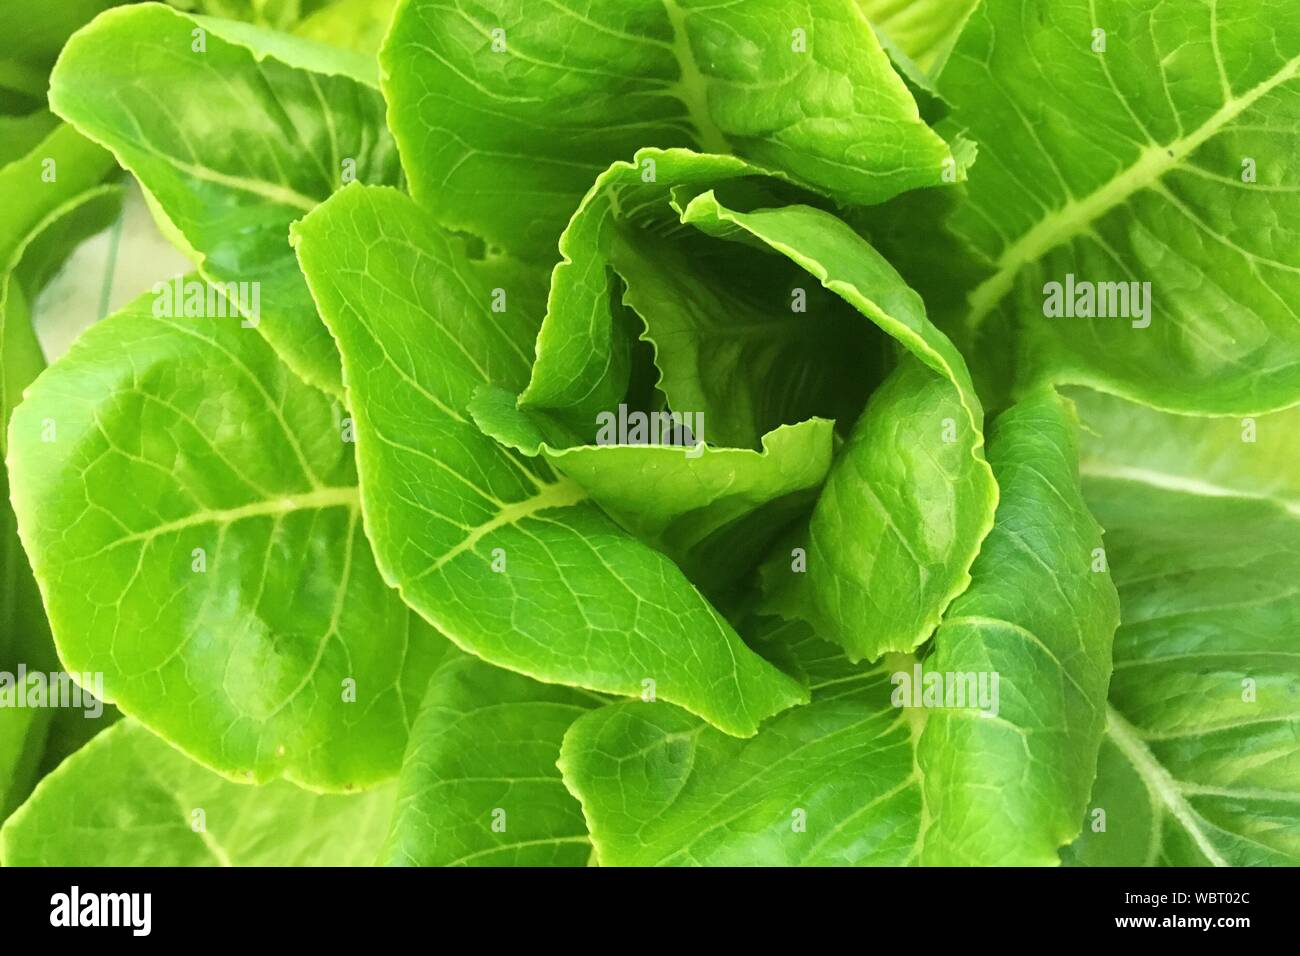 Close-up Of Green Cabbage Stock Photo